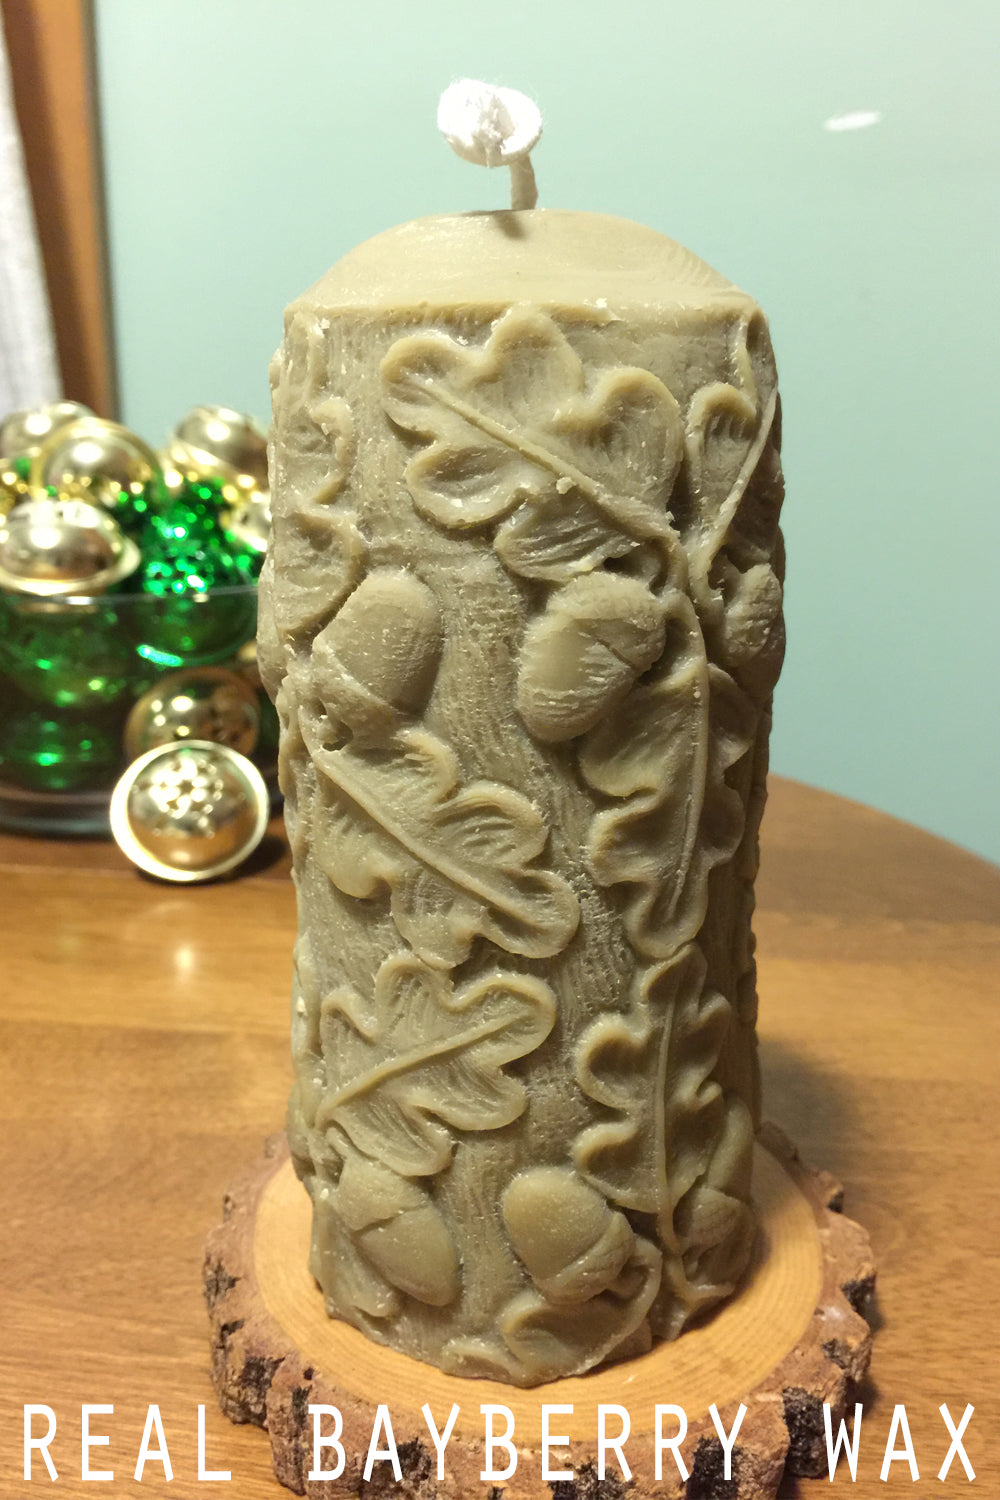 Genuine Bayberry Wax Pillar Candle- Oak leaves and acorns - Lizzy Lane Farm Apothecary